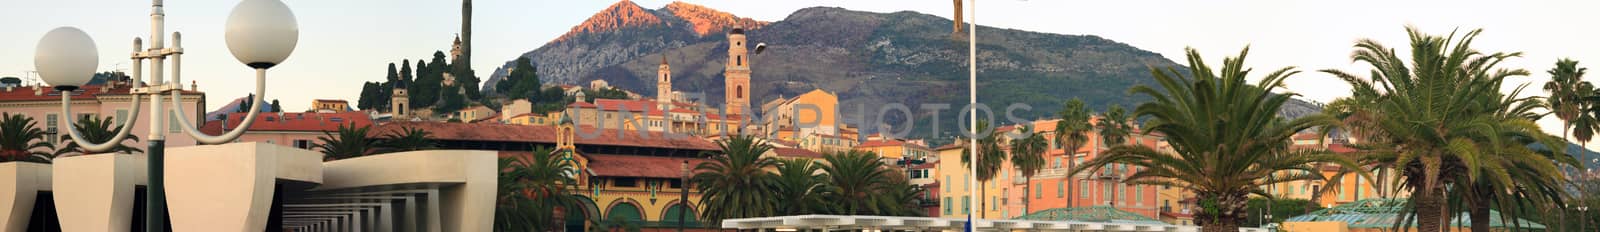 Beautiful Sunset on the beach and the town of Menton, French Riviera